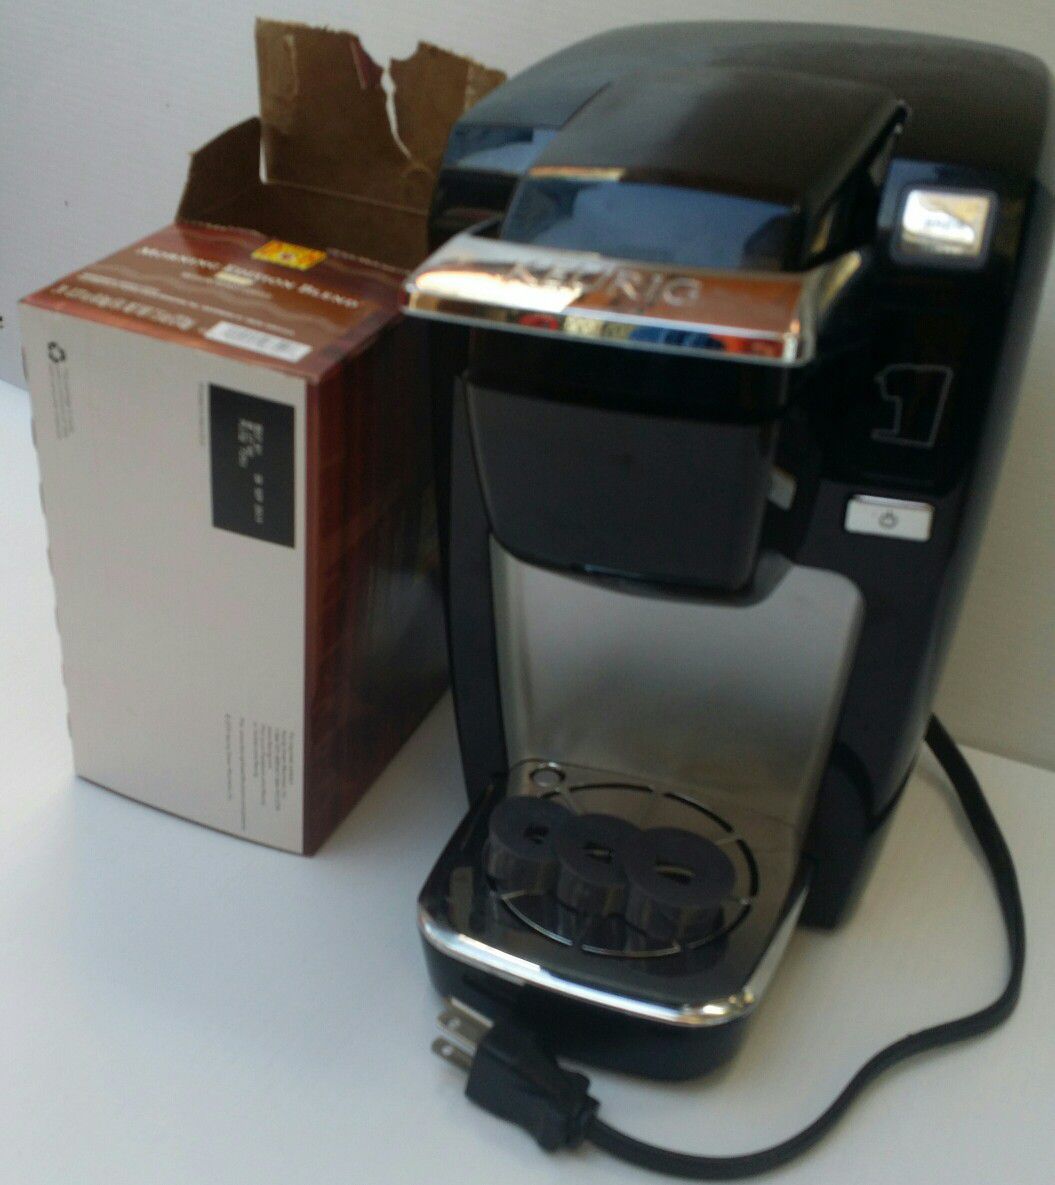 25.00 -Keurig K10 Mini Plus Coffee Maker Brewing System --Black color with chrome looking accents...